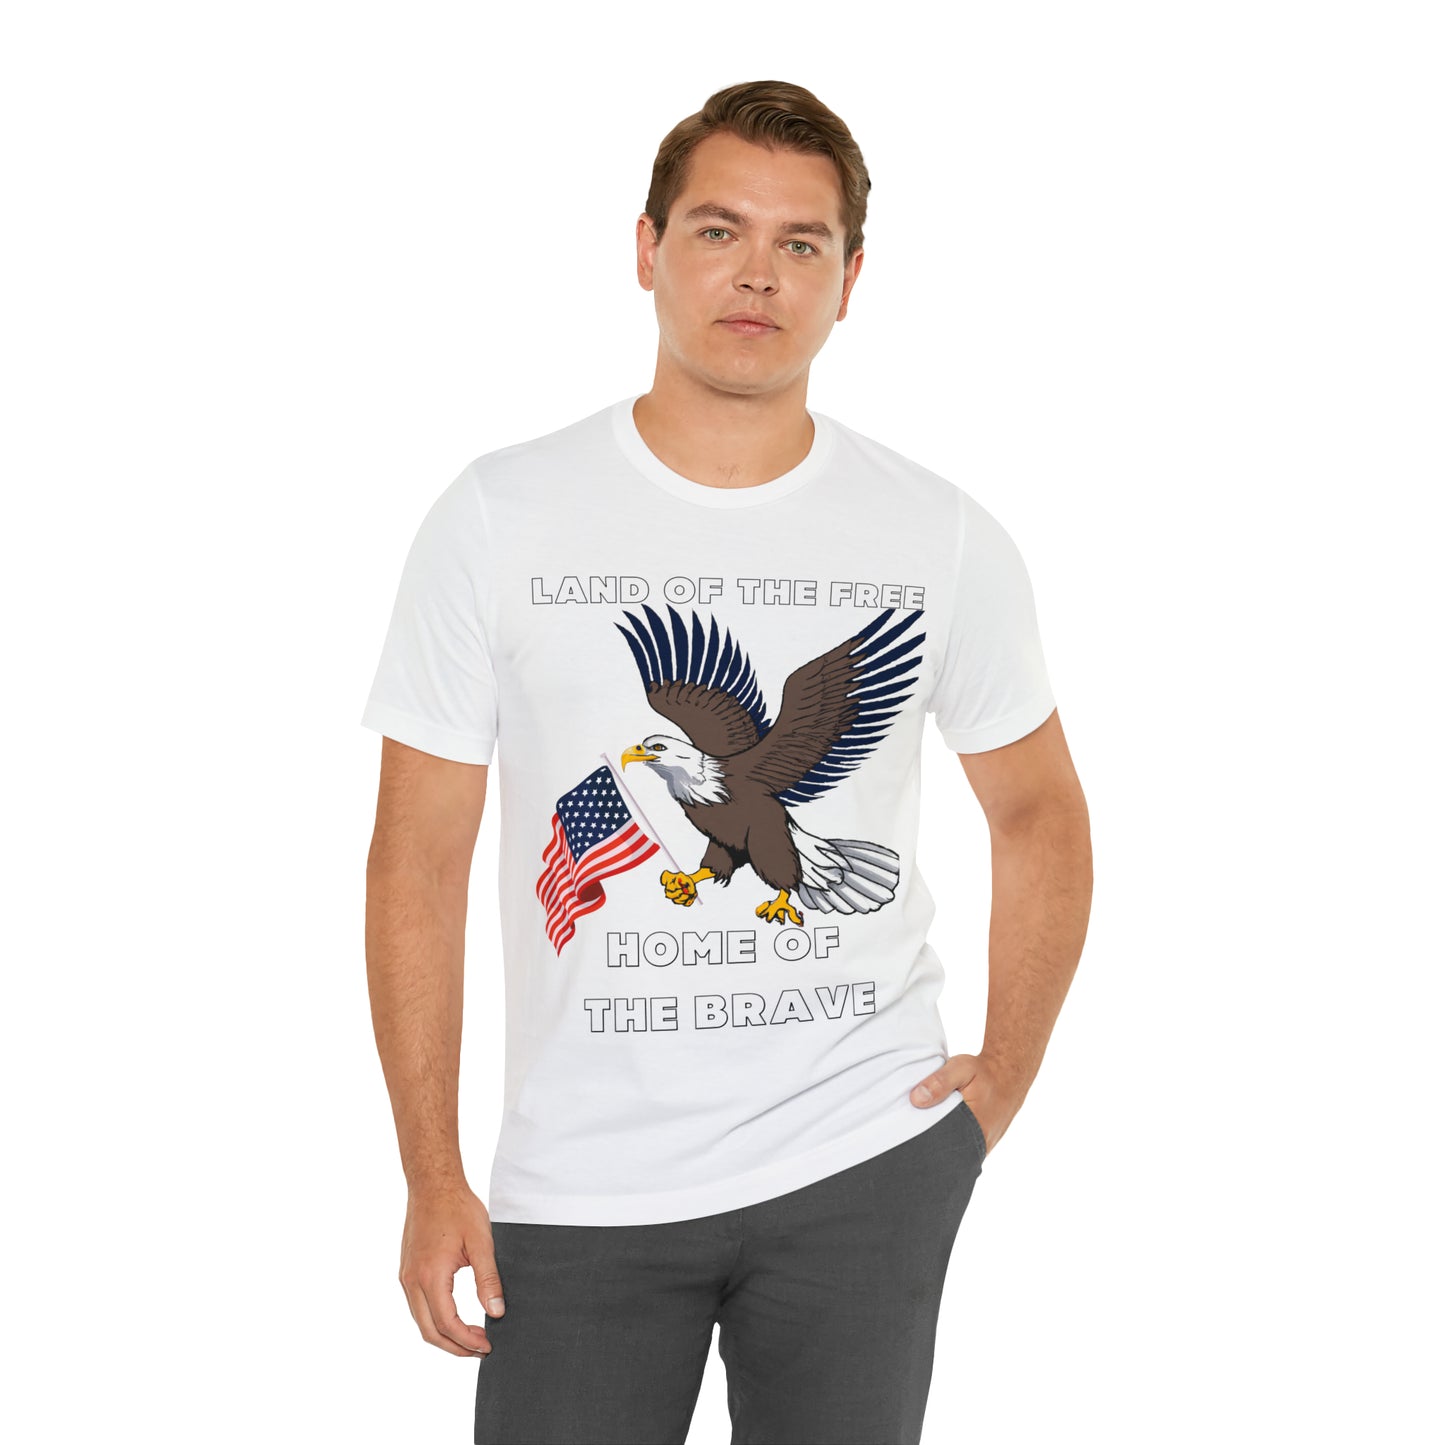 Land of the Free, Home of the Brave: Celebrate Independence Day with Patriotic Shirts - Freedom, Fireworks, and More